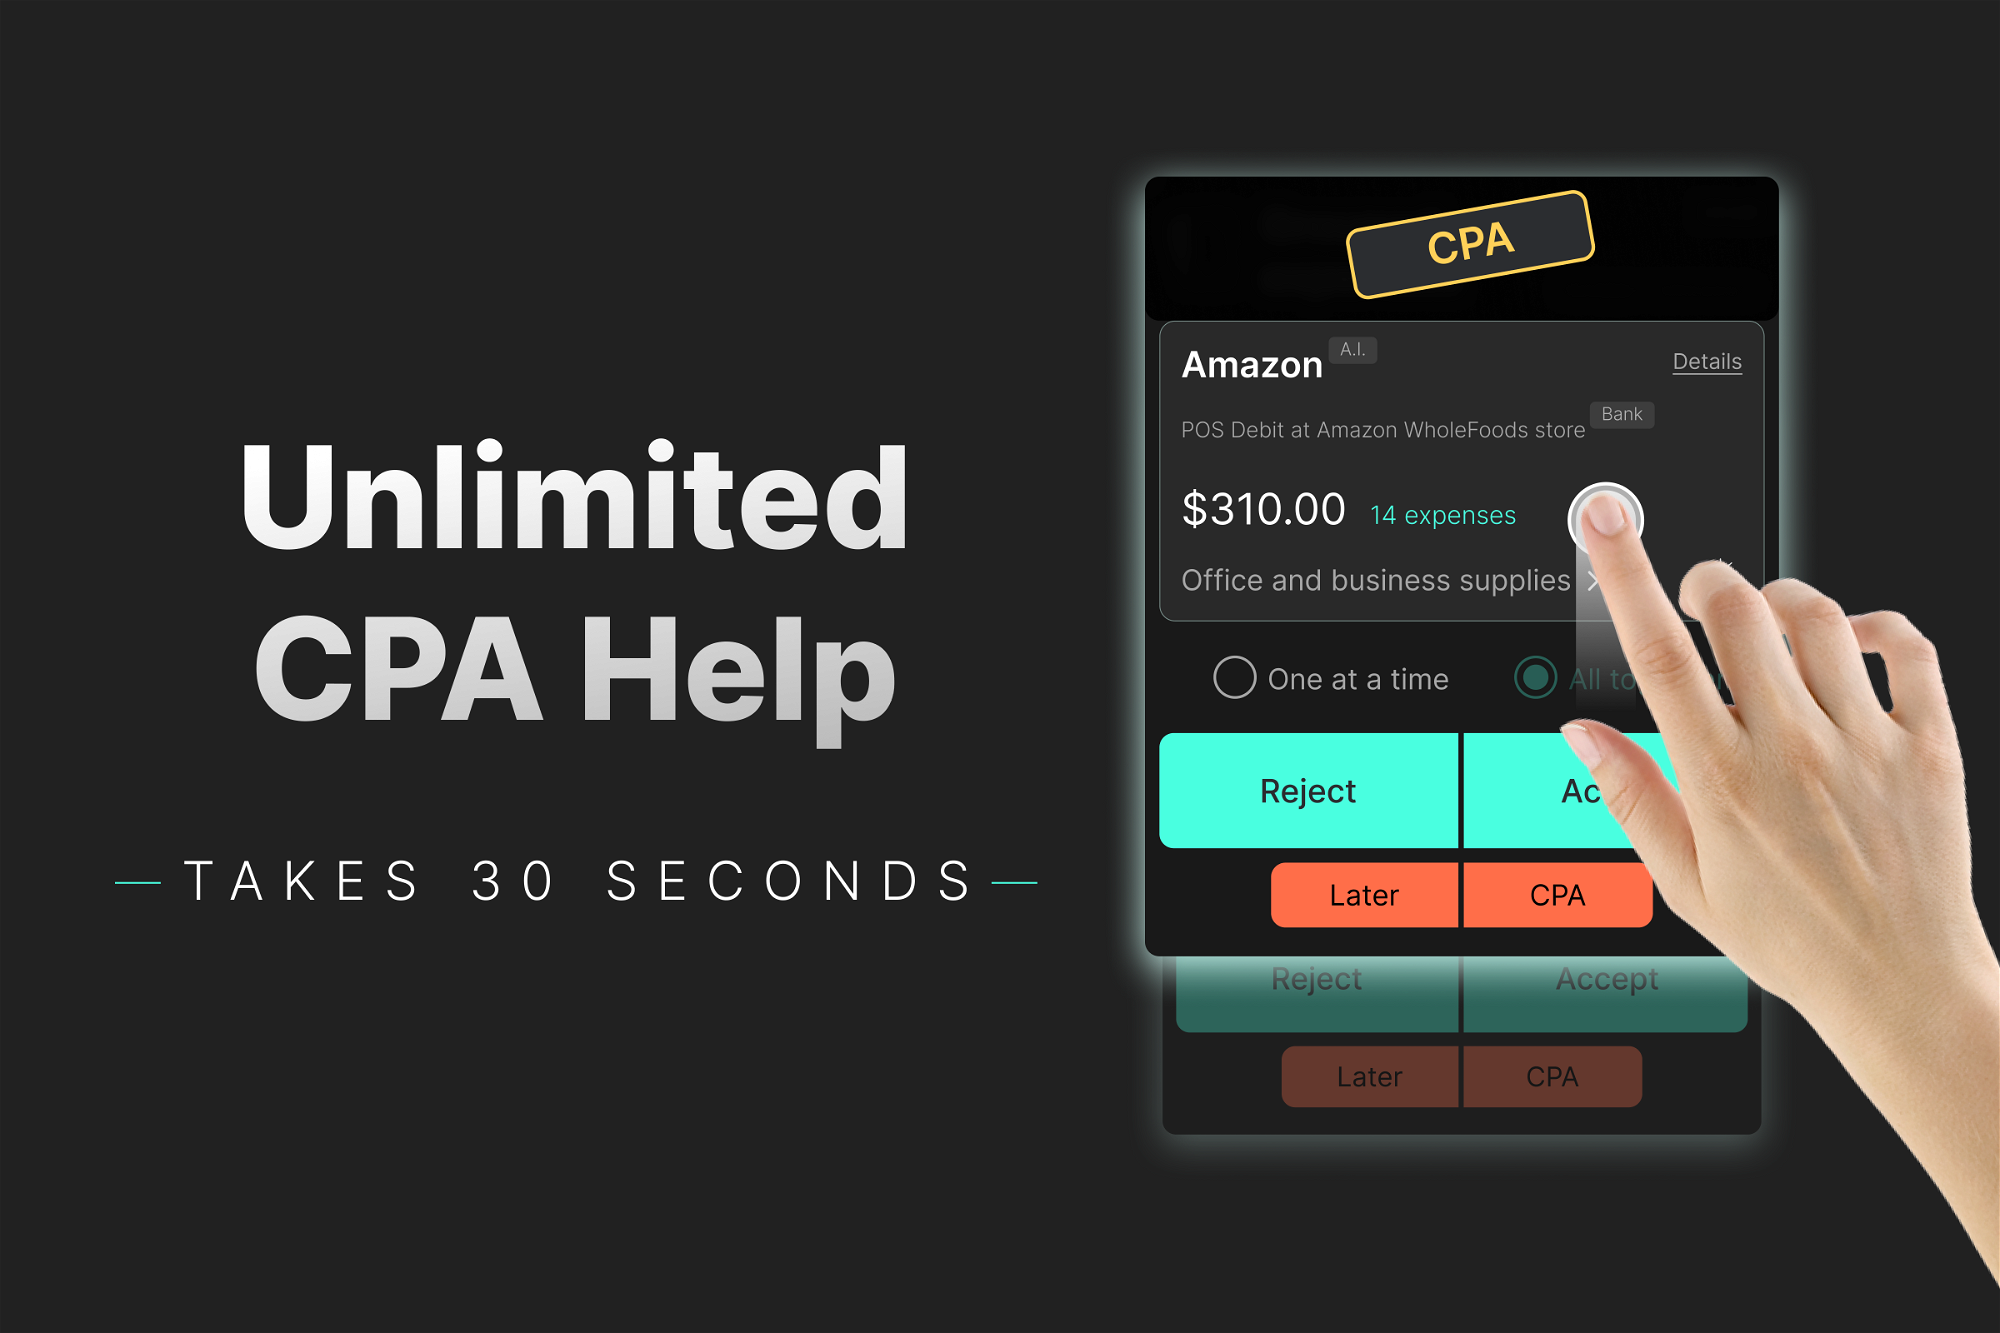 Connect with CPA